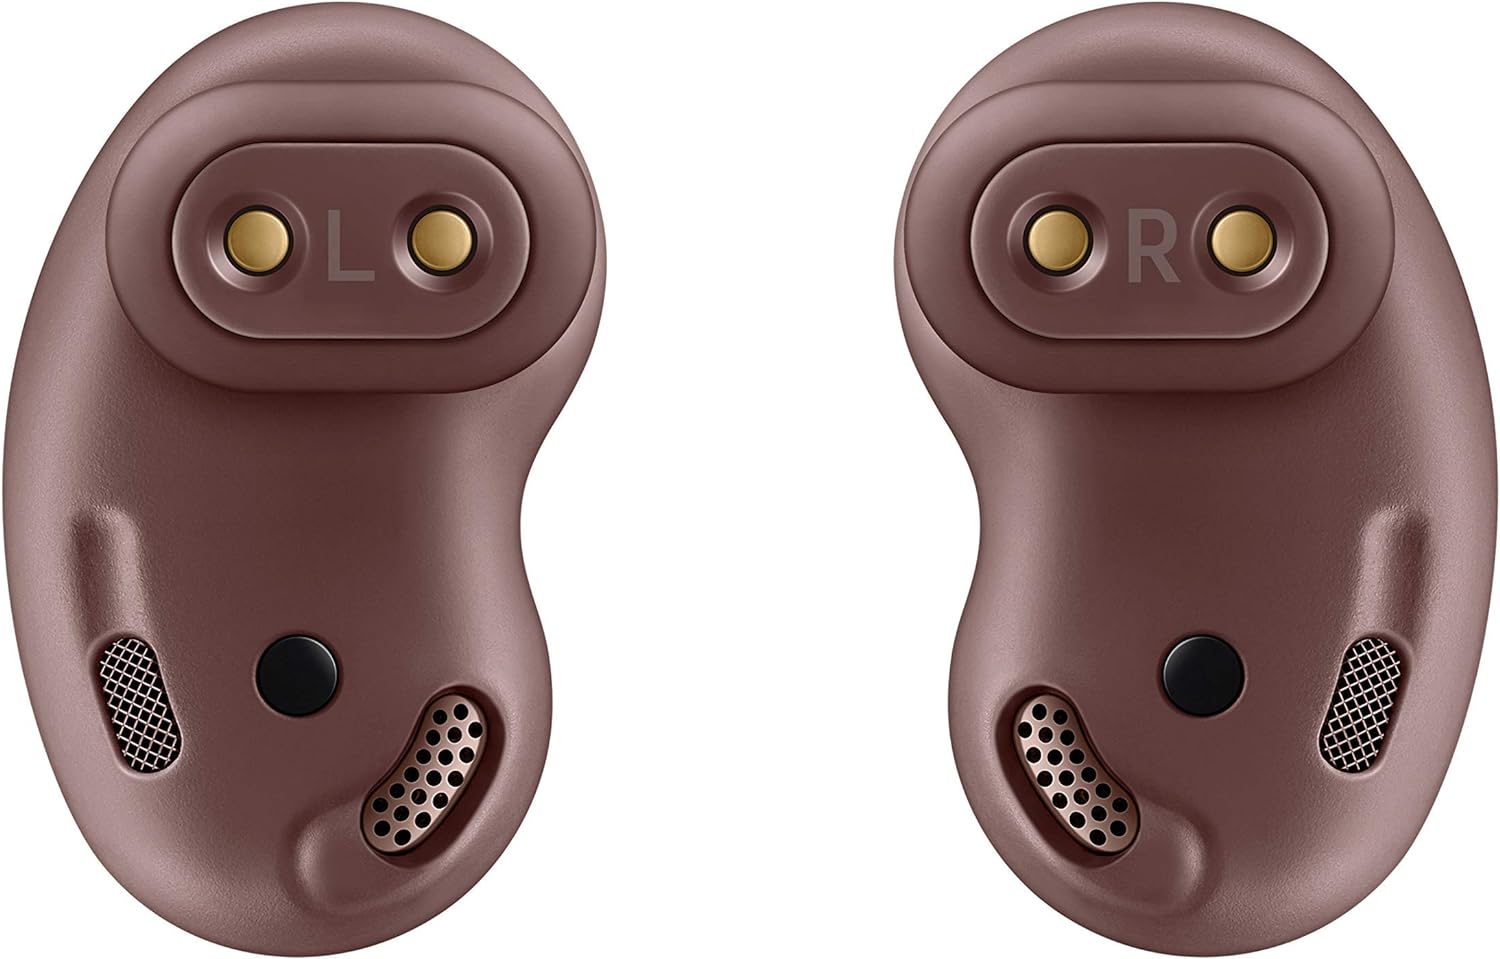 Samsung Galaxy Buds Live - True Wireless Earbuds with Active Noise Cancelling in Mystic Bronze 8806090556487